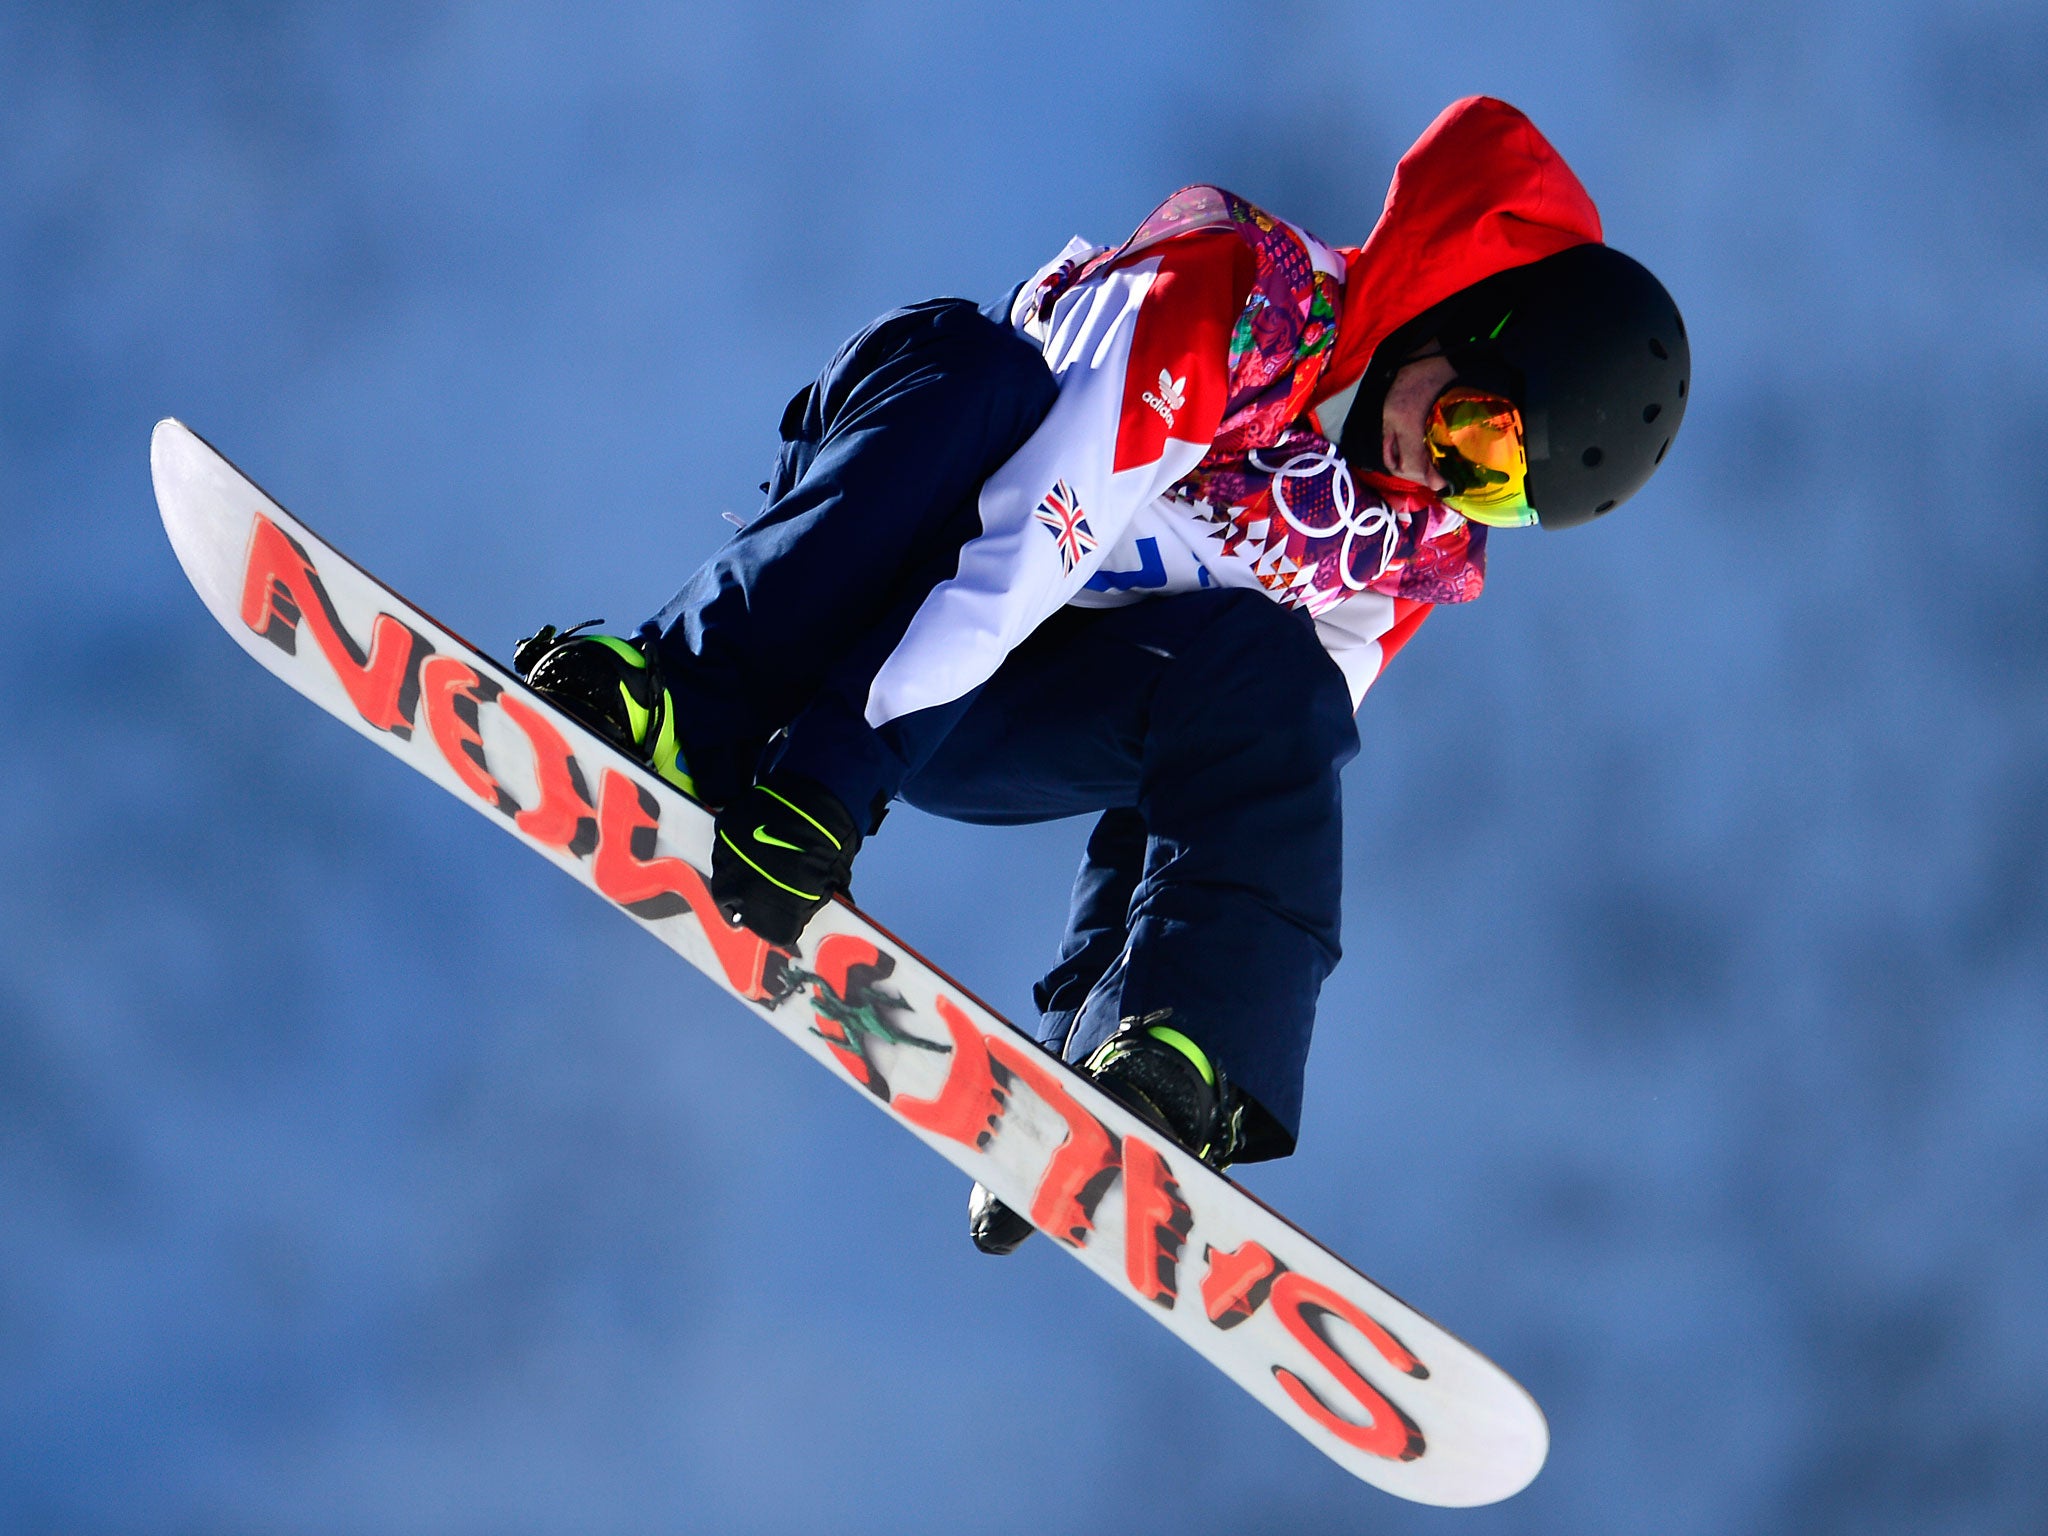 Jamie Nicholls has qualified for the Snowboard style finals